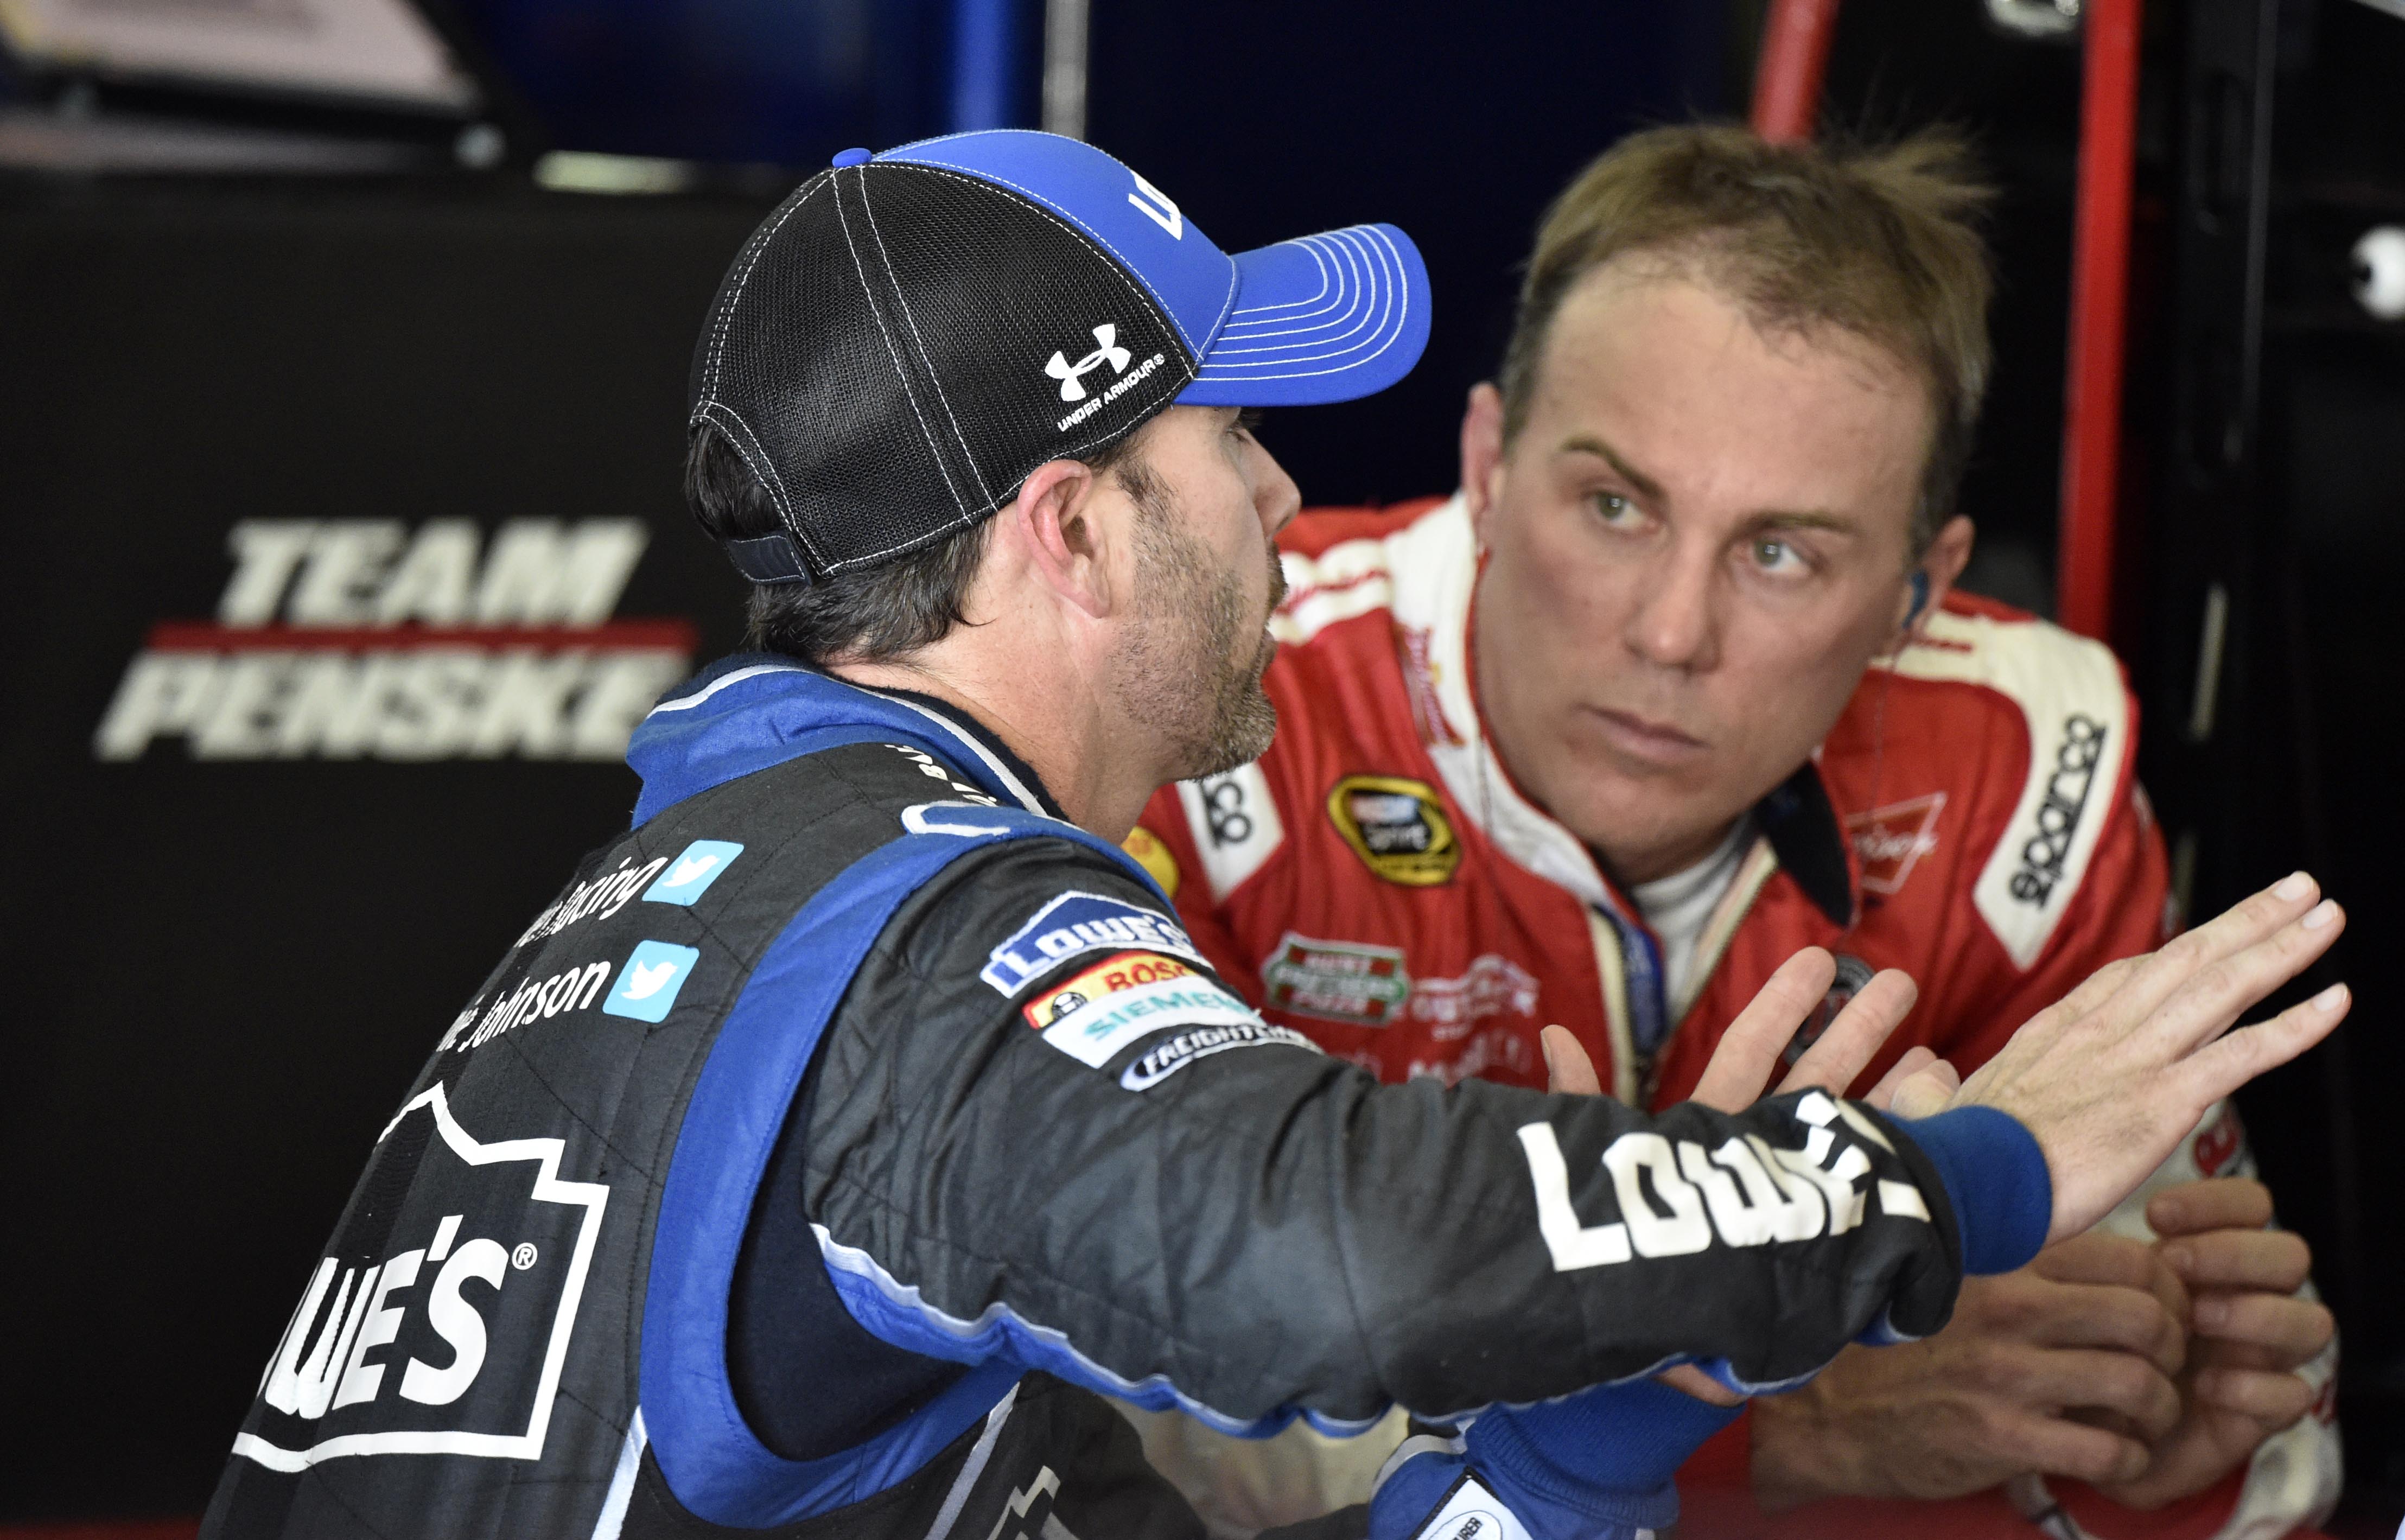 NASCAR Sprint Cup Series driver Kevin Harvick (right) talks with Jimmie Johnson during practice for the Ford EcoBoost 400 at Homestead-Miami Speedway. (USA TODAY Sports)